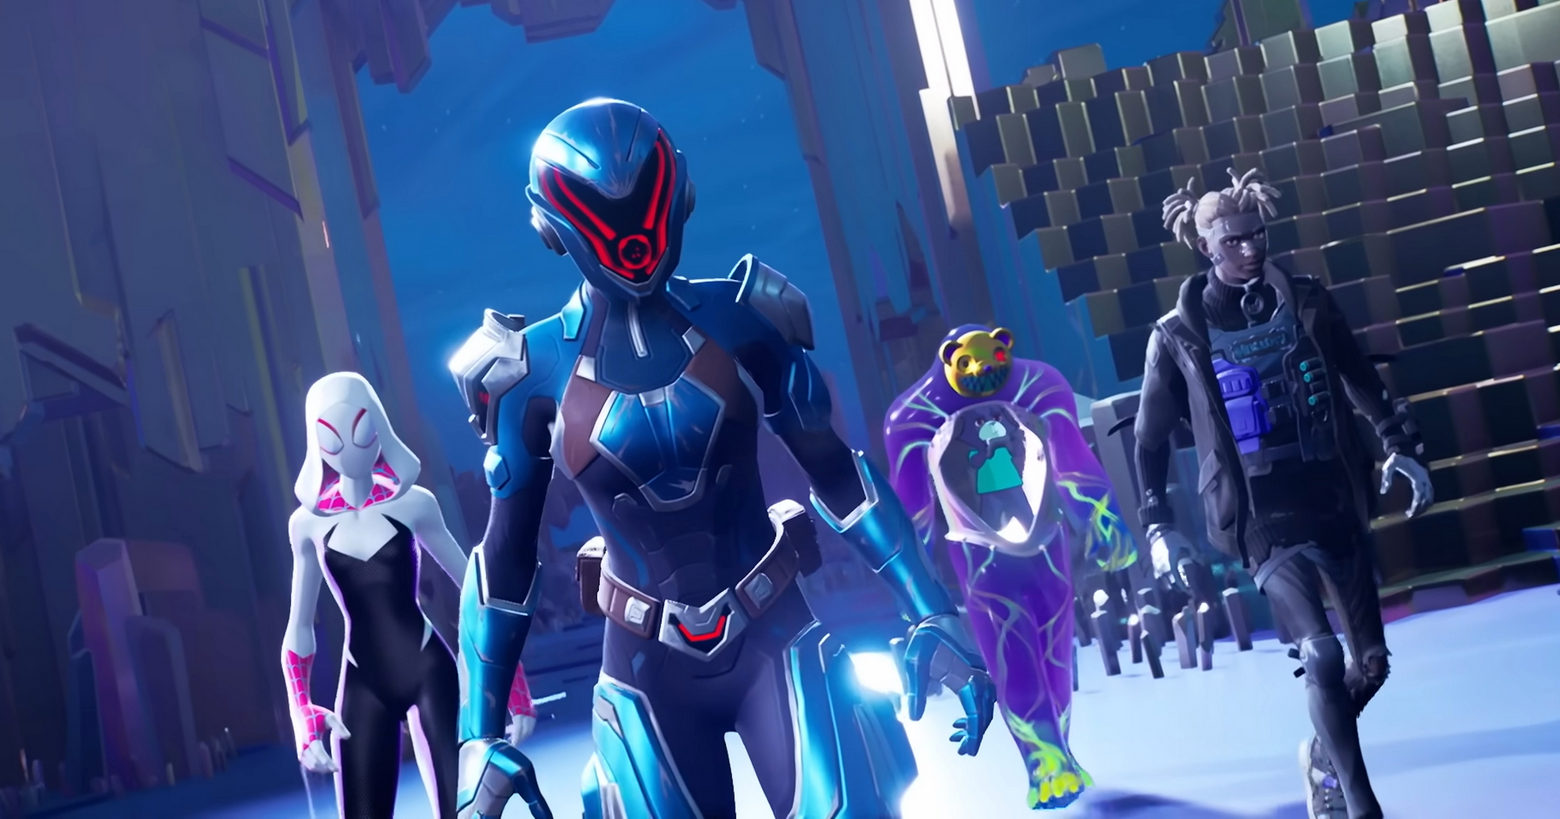 Play the new season in Fortnite Chapter 4 soon and explore new areas with your favorite heroes. In this screenshot from Chapter 3 Season 4: Paradise, we see various main characters running towards the camera in a slightly slanted perspective in half-total. They are in a stadium-like hall that seems blue. On the right side in the background, a grandstand is shown in a cutaway. The characters are walking in a wedge formation.